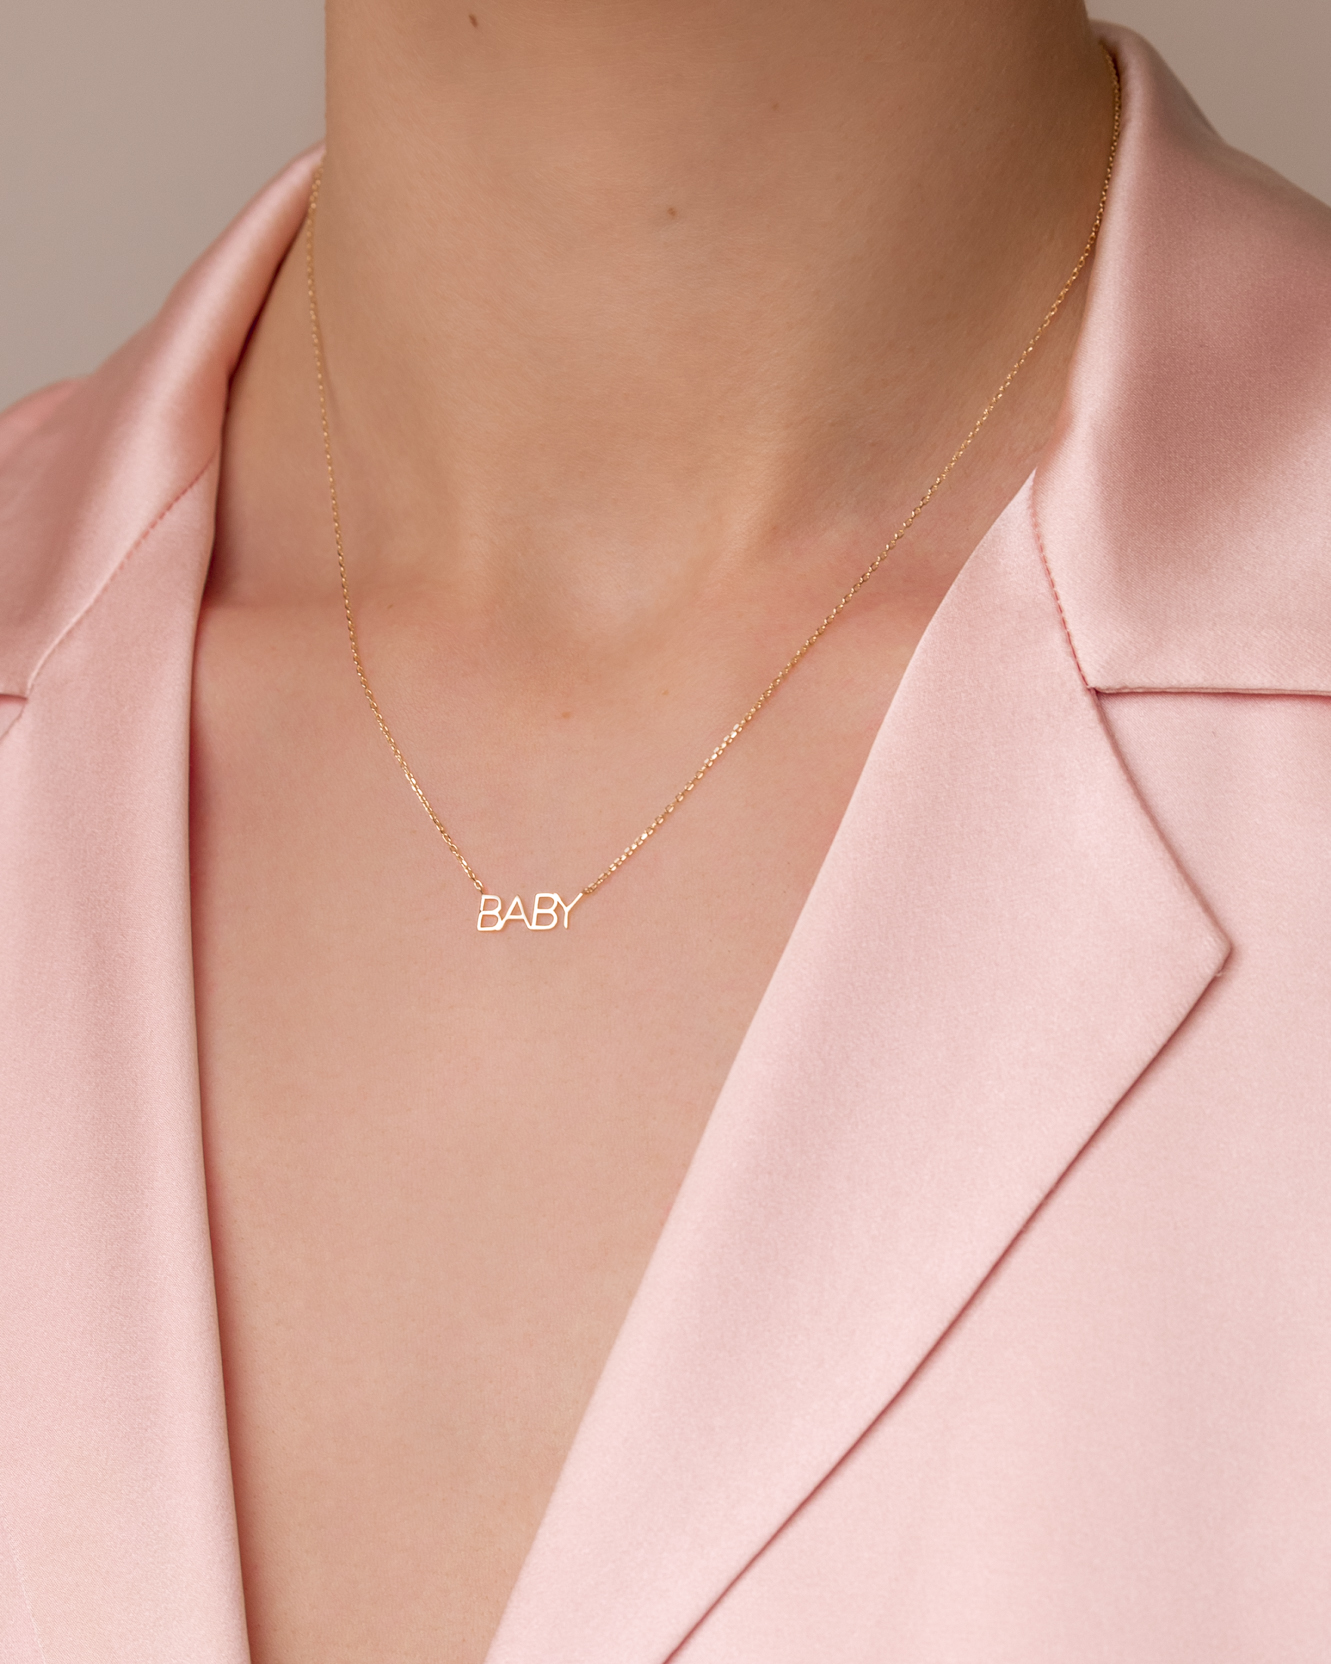 Nameplate Baby Necklace Yellow Gold